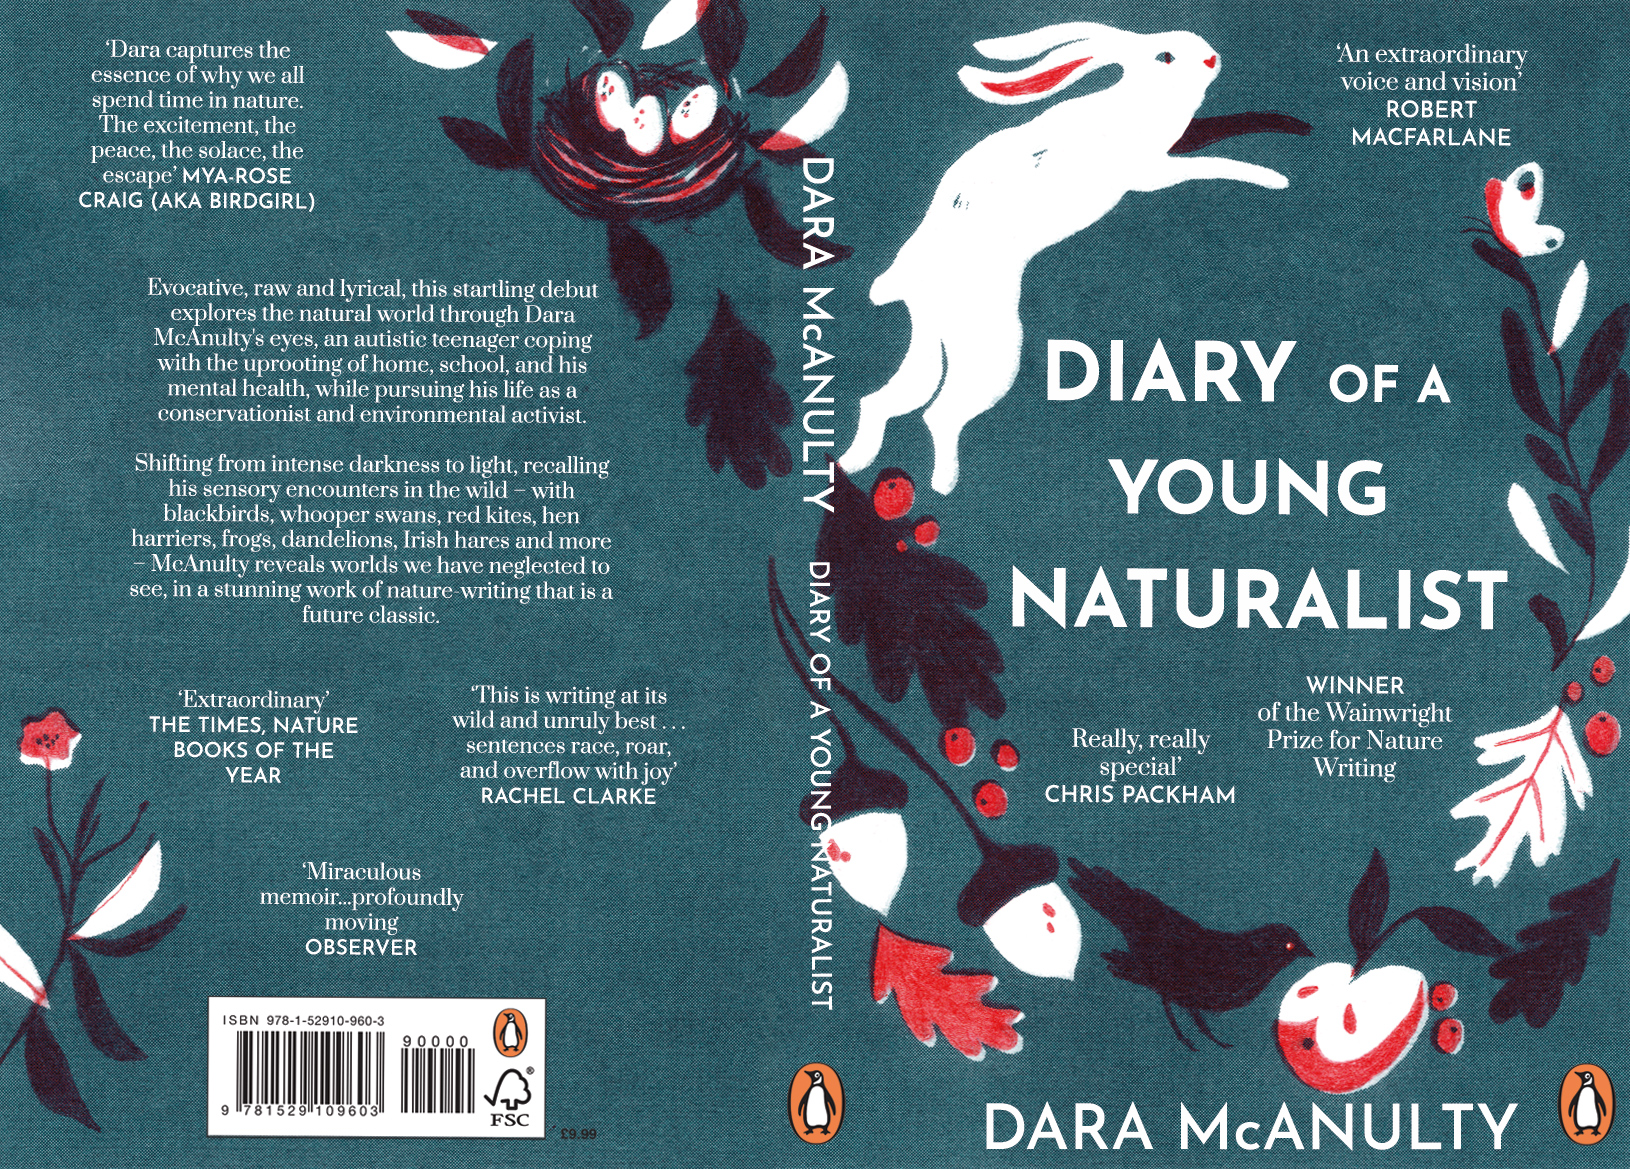 Book cover for “Diary of a Young Naturalist” by Dara McAnulty, created for the Penguin Cover Design Award